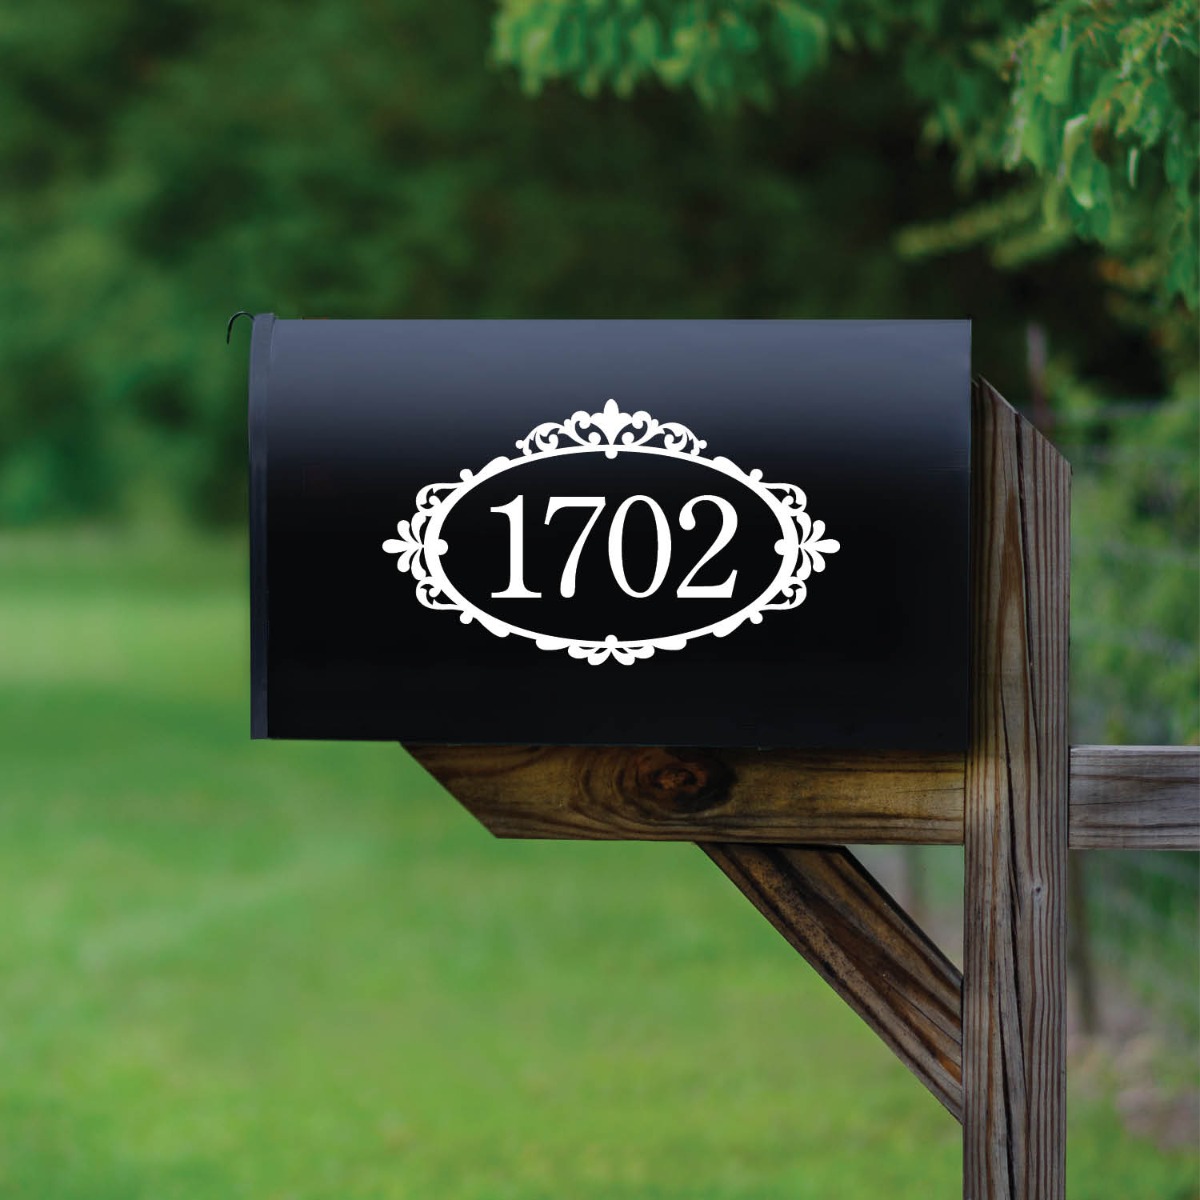 Ornamental mailbox decal wth house number